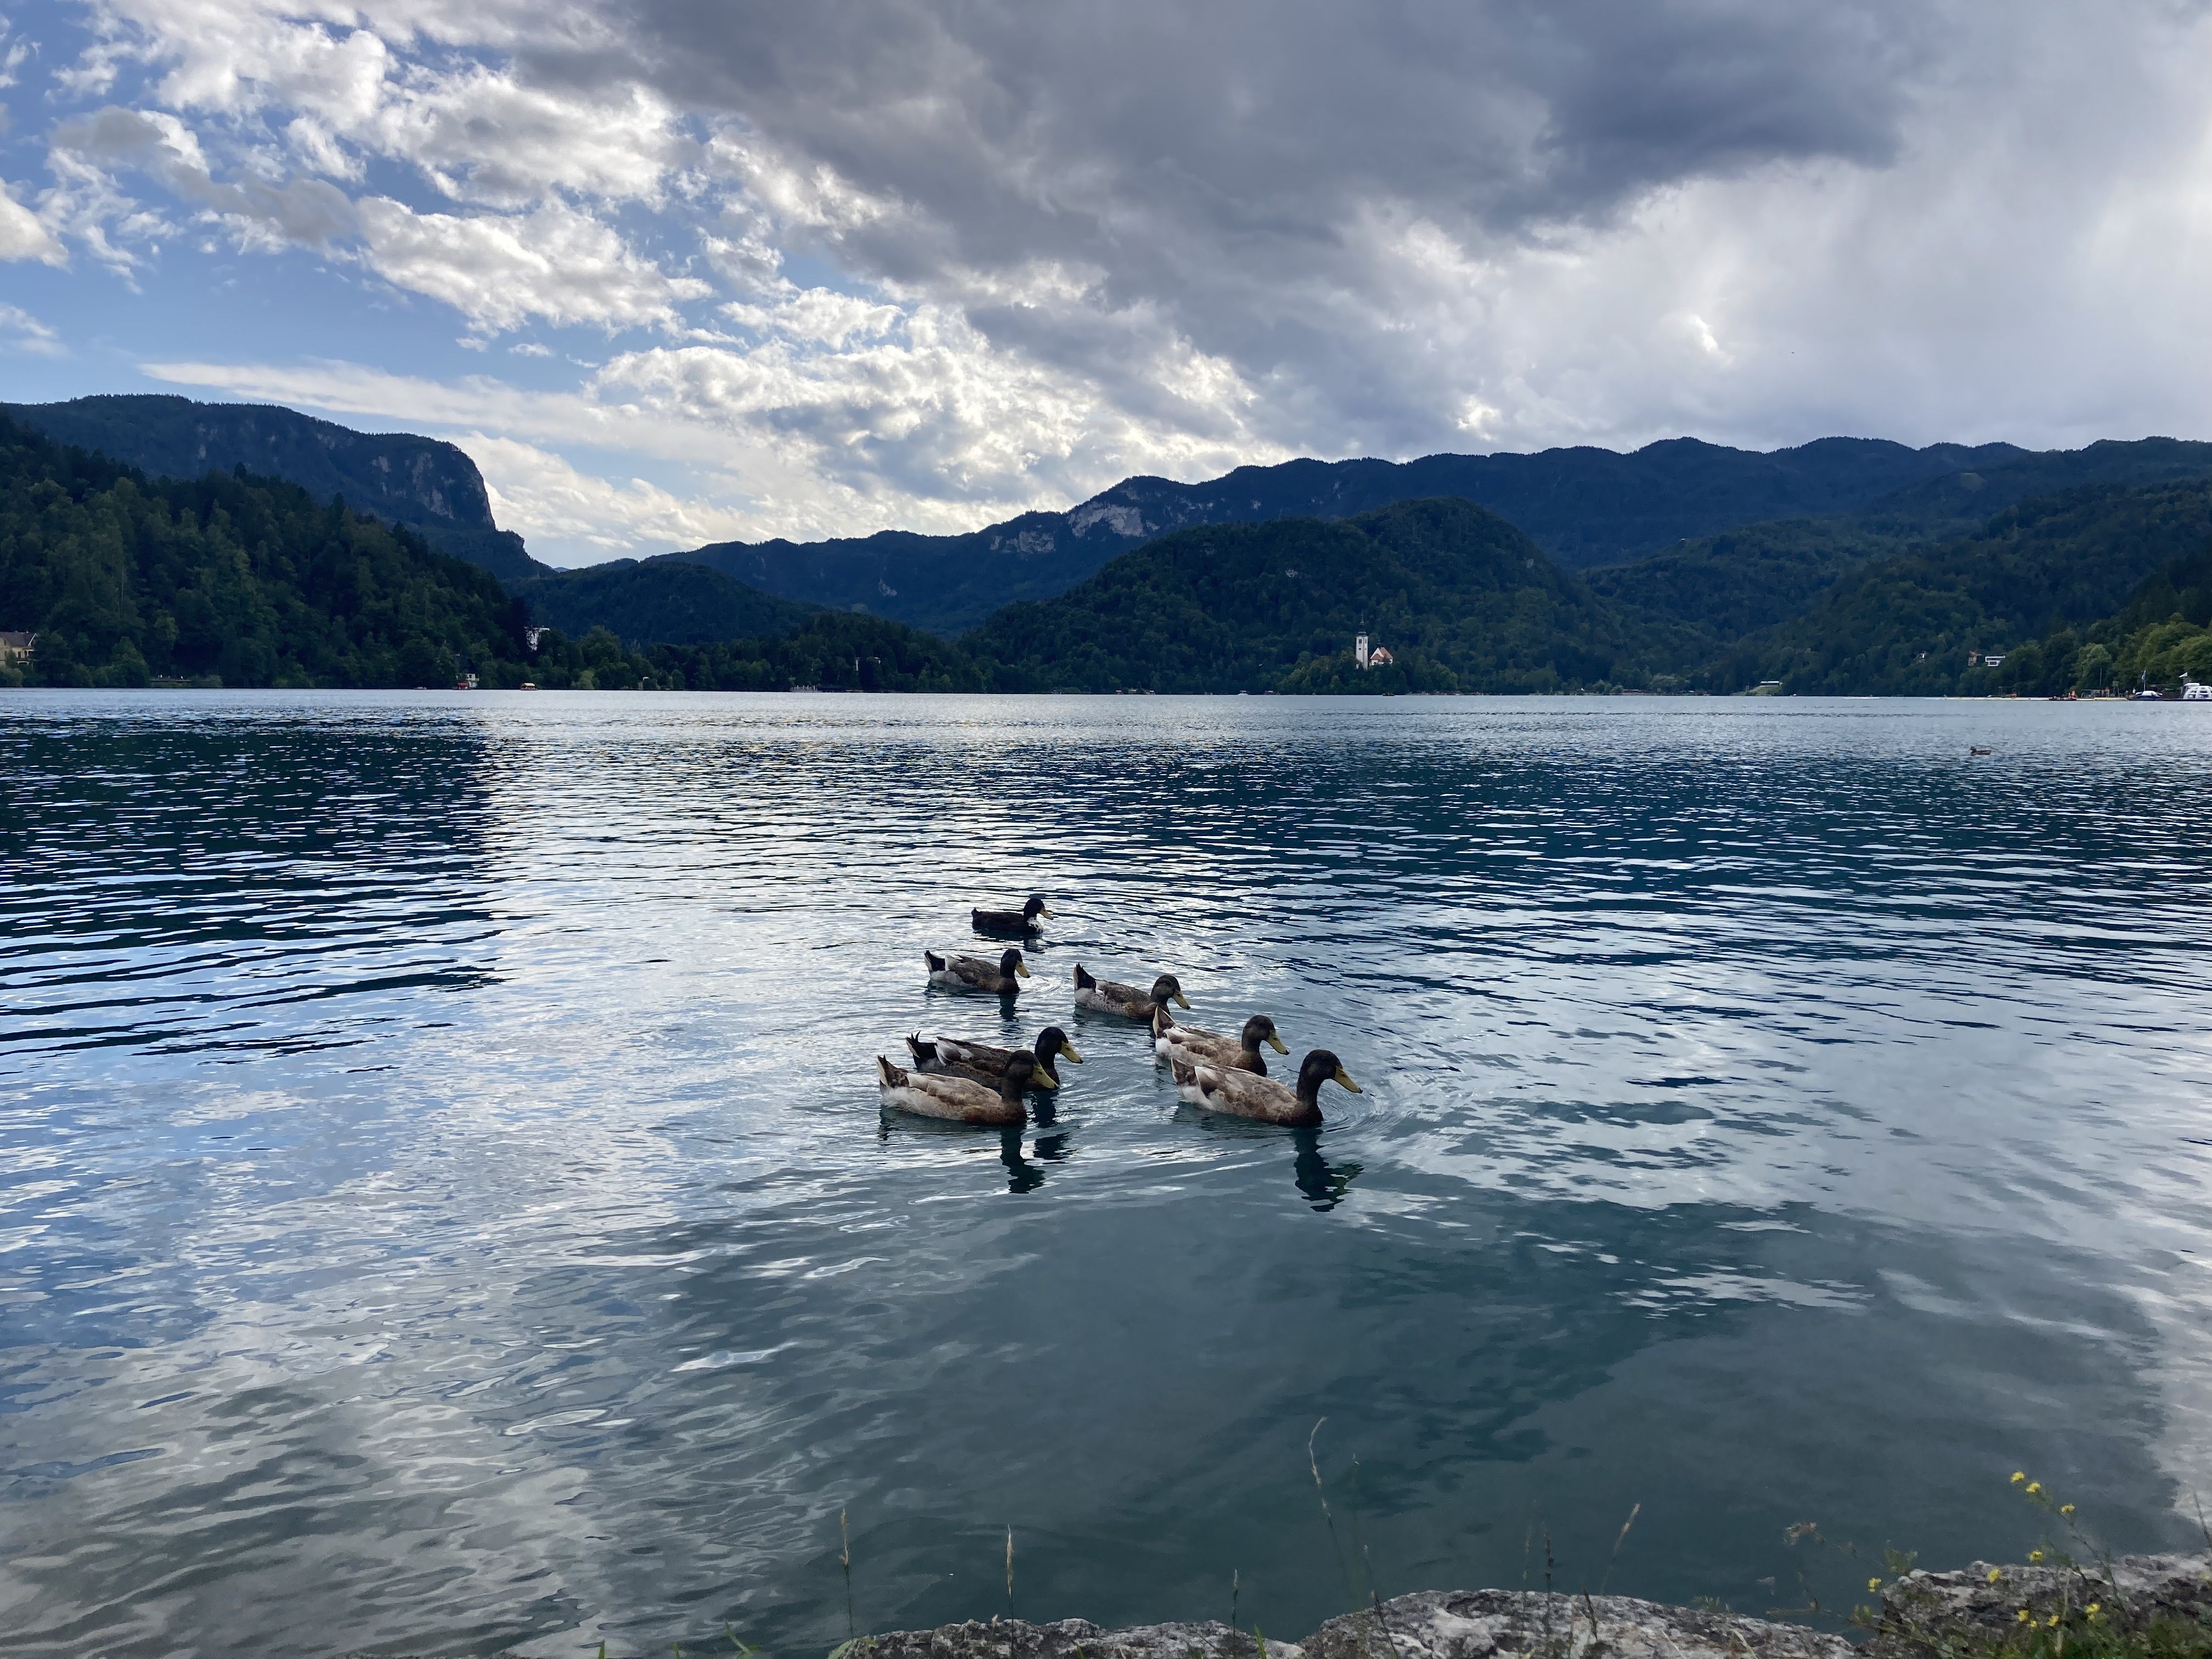 Slov_ enian ducks in Bled. The bad man is nowhere to be found….yet